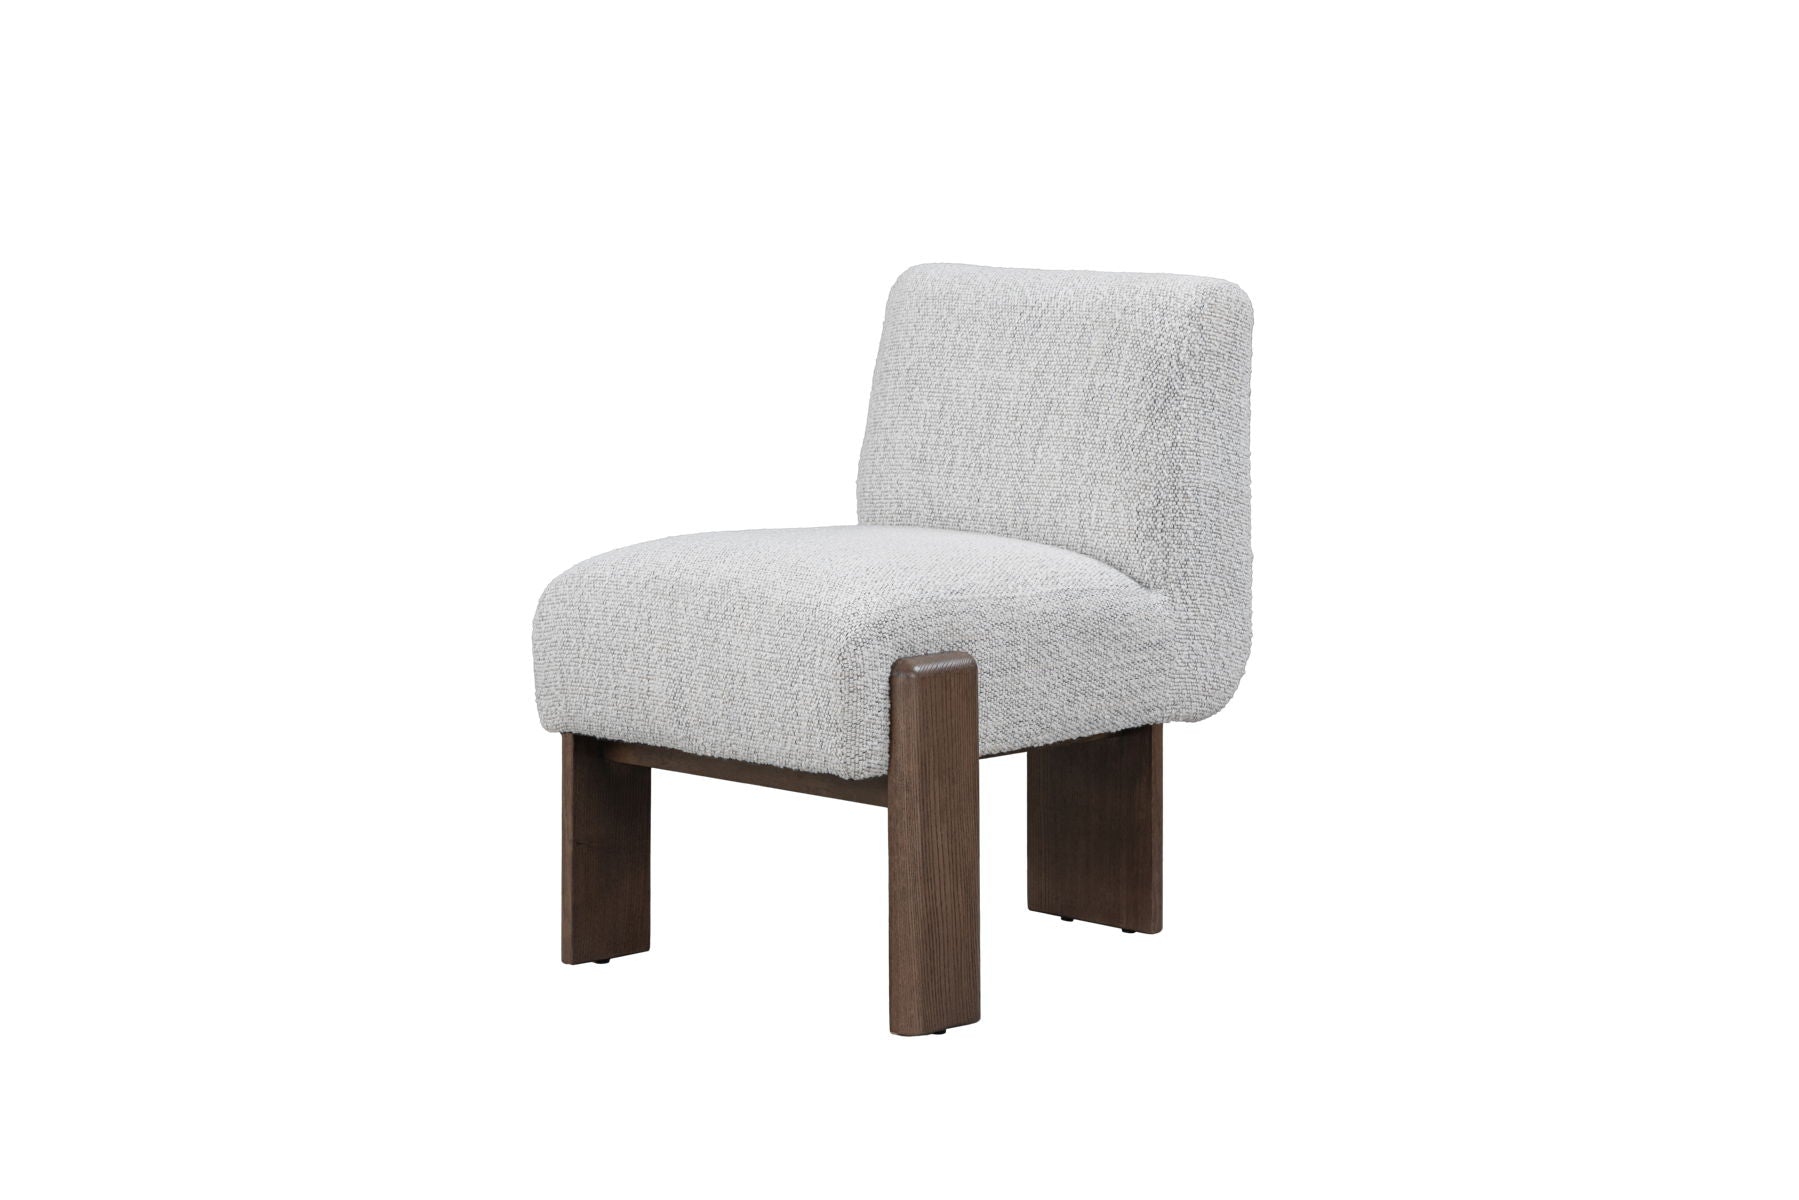 Chelsea - Upholstered/Wood Dining Chair - Pixel Ivory